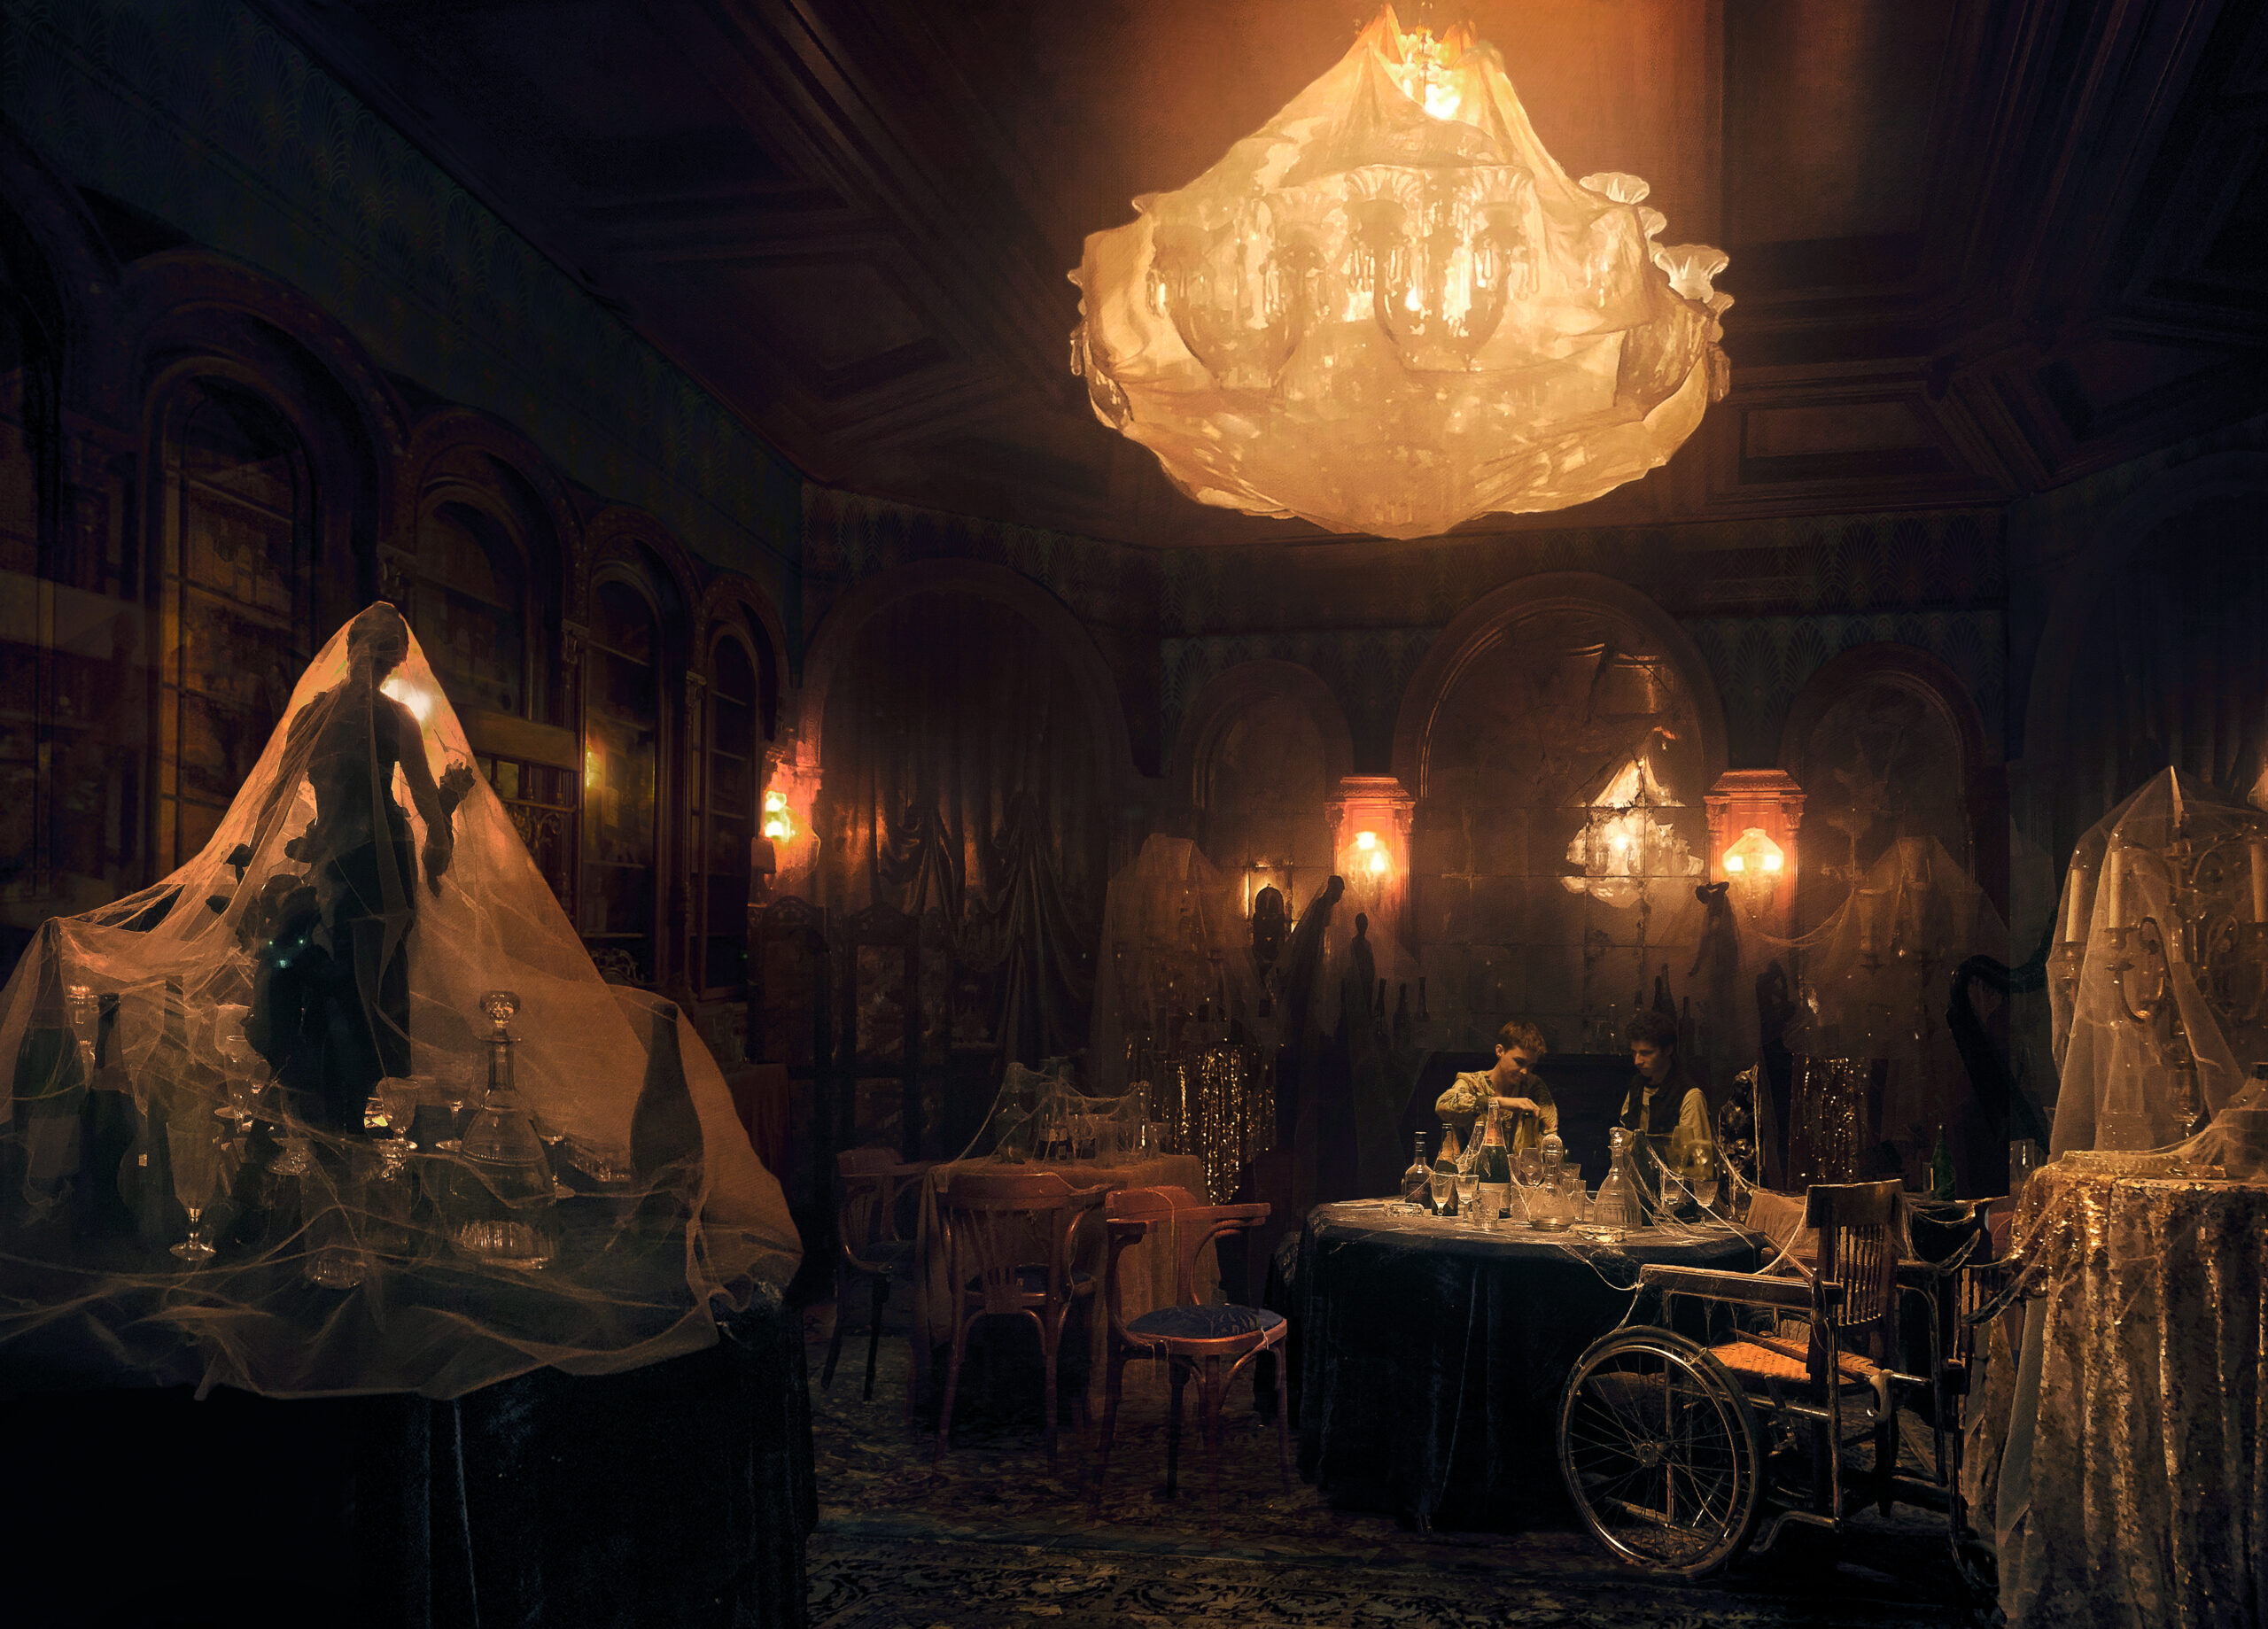 THE DOORMAN - Directed by Ryuhei Kitamura - Production Design by Luca Tranchino - Int. Speakeasy - ©2020 - Lionsgate